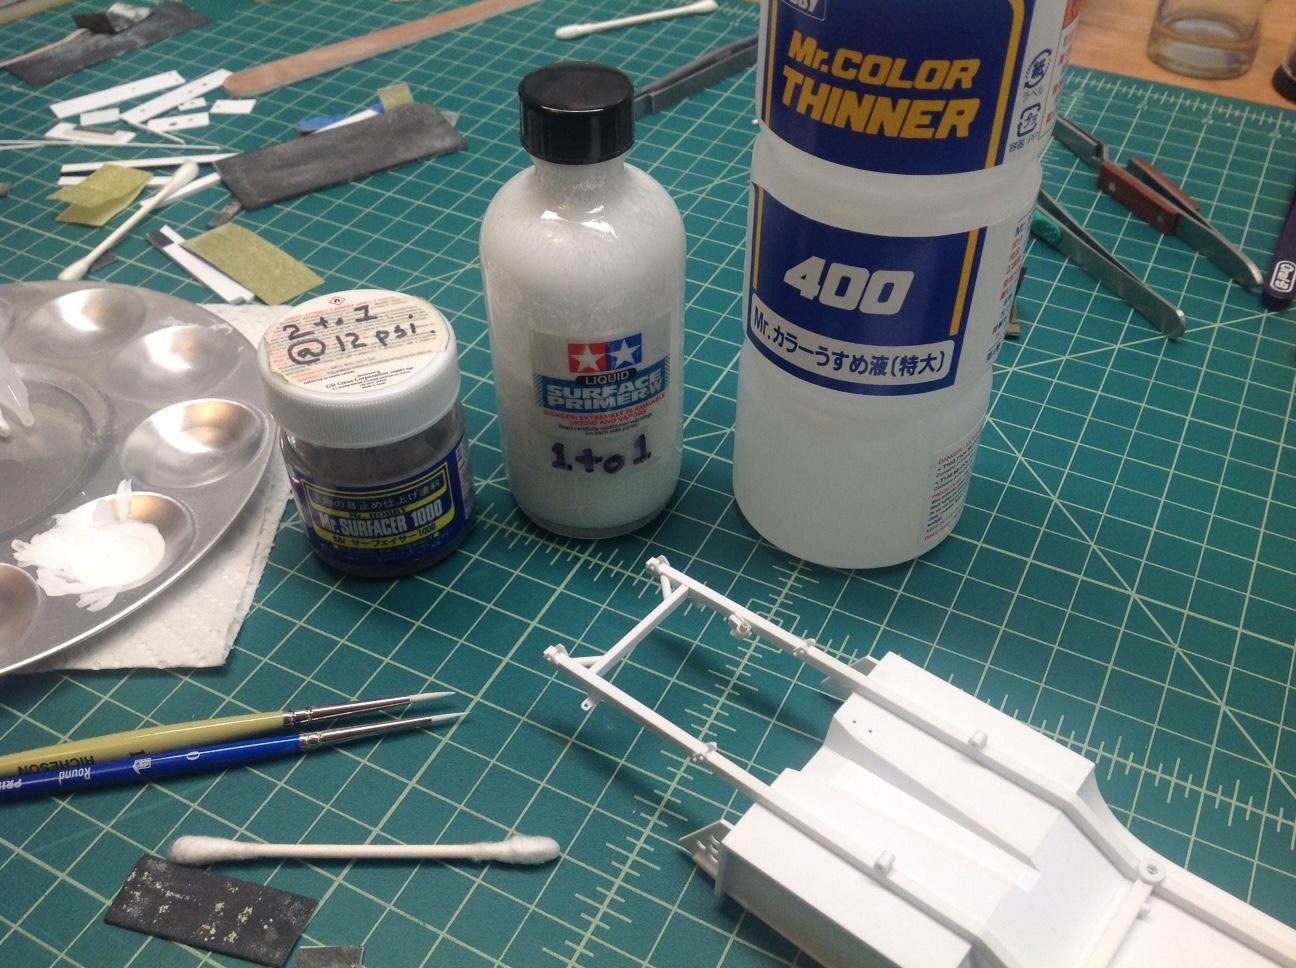 Do I need to thin down this primer for my airbrush and if so can I use this  thinner? : r/modelmakers